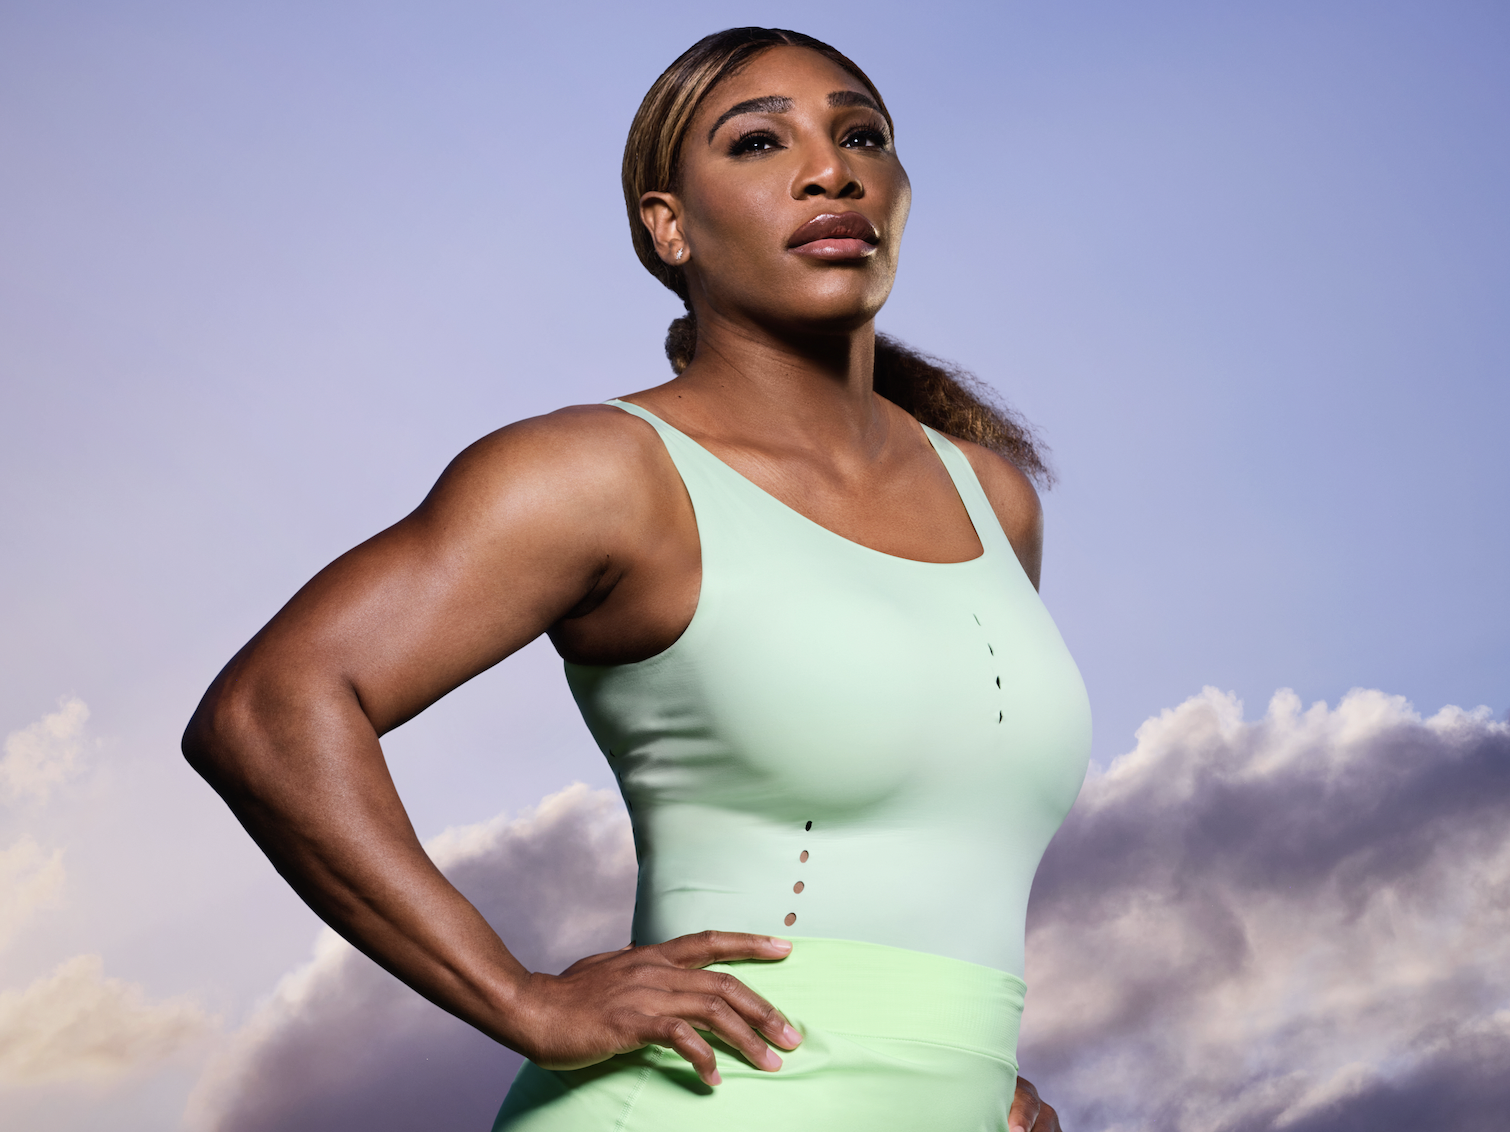 Serena Williams Launches New Lifestyle Brand 'Will Perform'